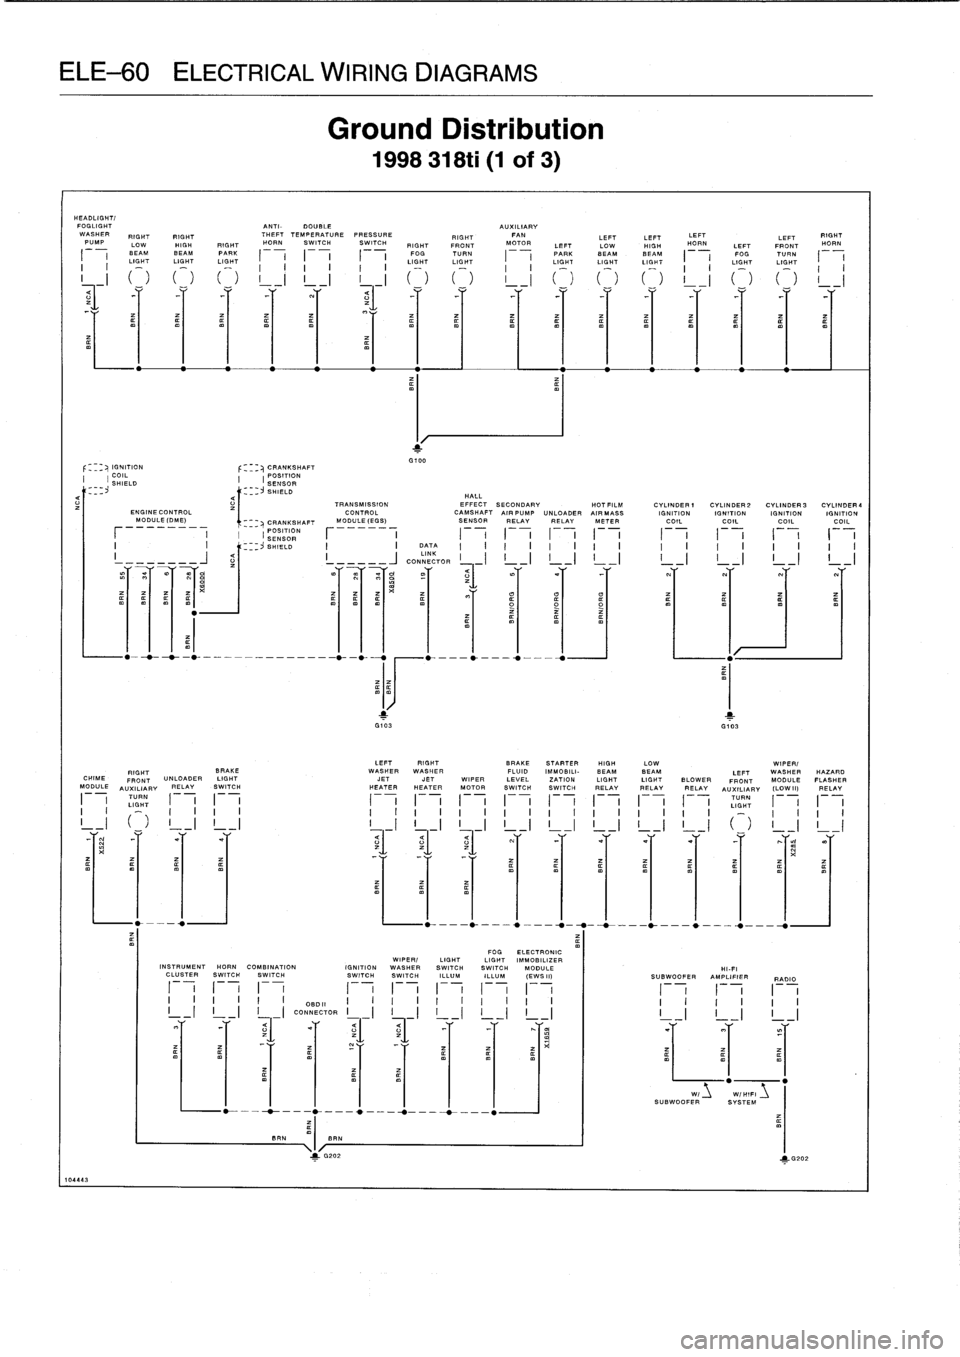 BMW M3 1993 E36 Service Manual 
ELE-60
ELECTRICAL
WIRING
DIAGRAMS

HEADLIGHT/
FOGLIGHT

	

ANTI-
DOUBLE

	

AUXILIARY
WASHER

	

RIGHT

	

RIGHT

	

THEFT
TEMPERATURE
PRESSURE

	

RIGHT

	

FAN

	

LEFT

	

LEFT

	

LEFT

	

LEFT

